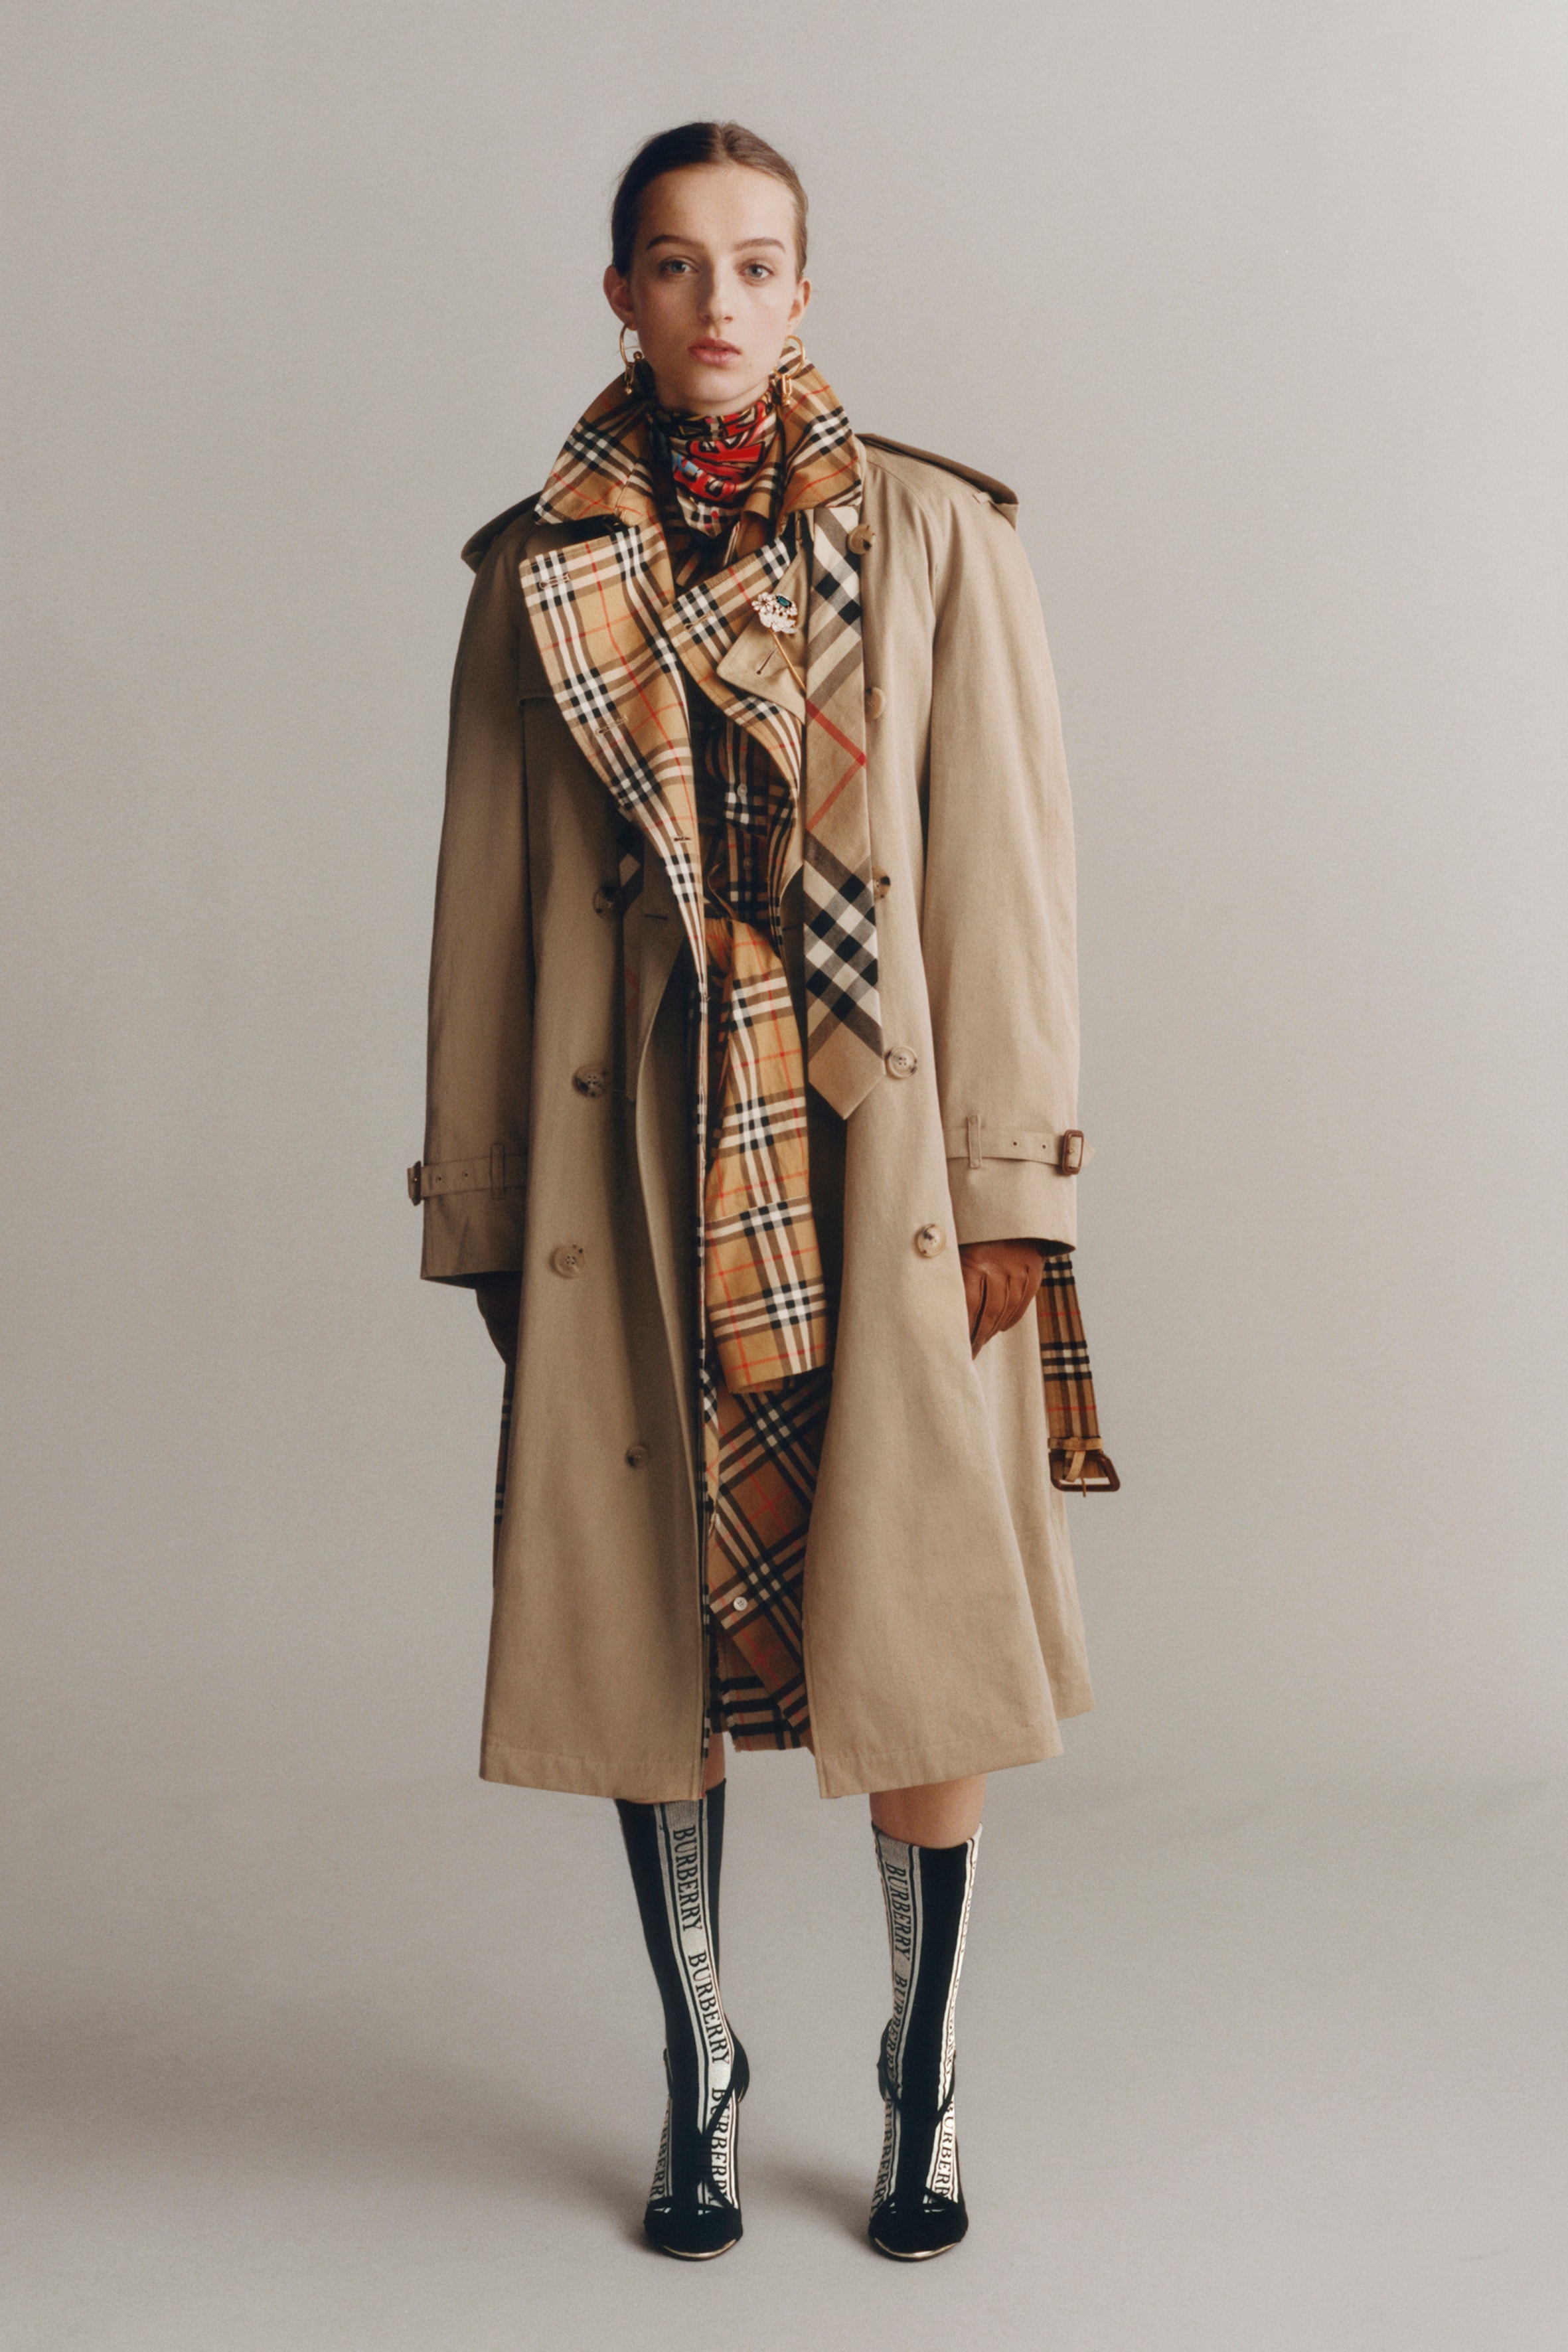 Burberry Iconic Trench Coat Reimagined Beige Nova Check Heritage Check Red White Black Print Jacket